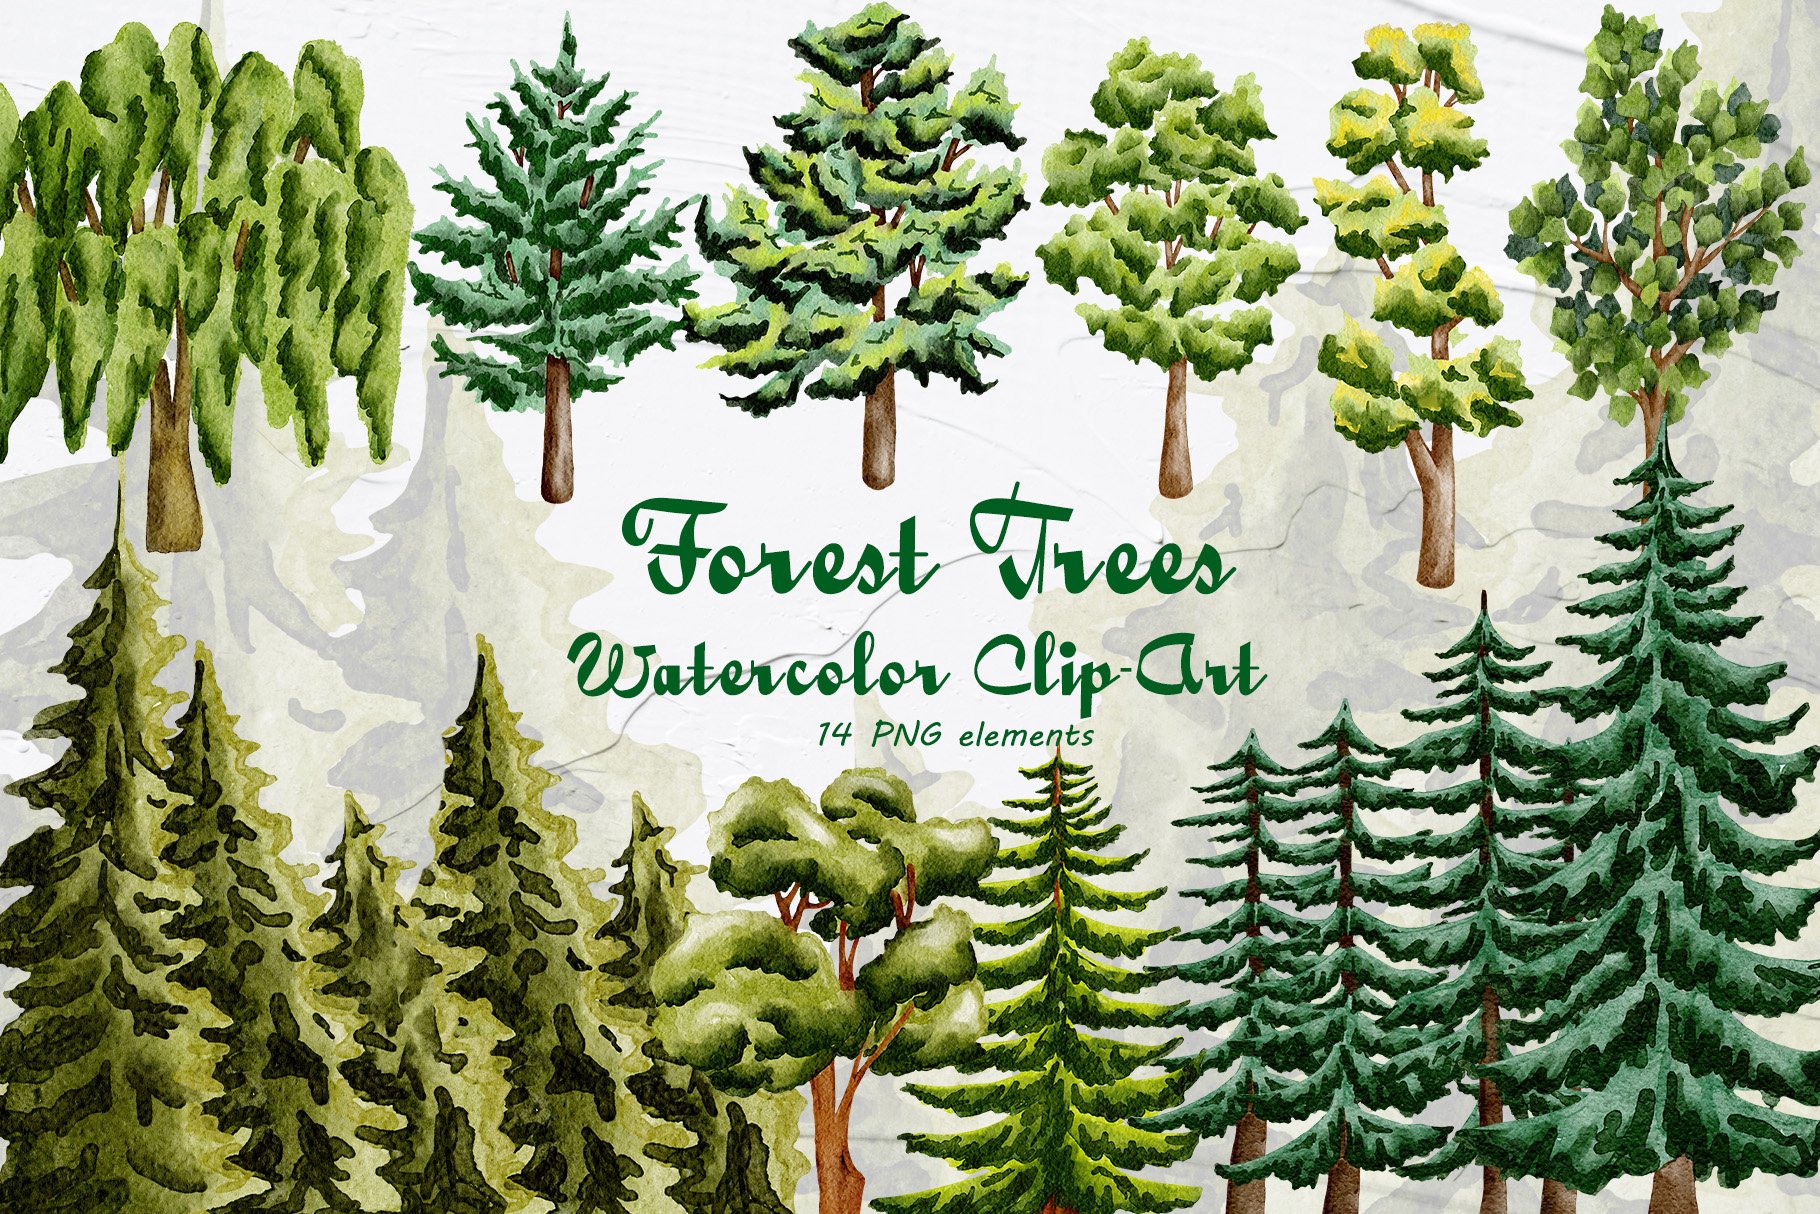 Forest Trees Watercolor Clipart cover image.